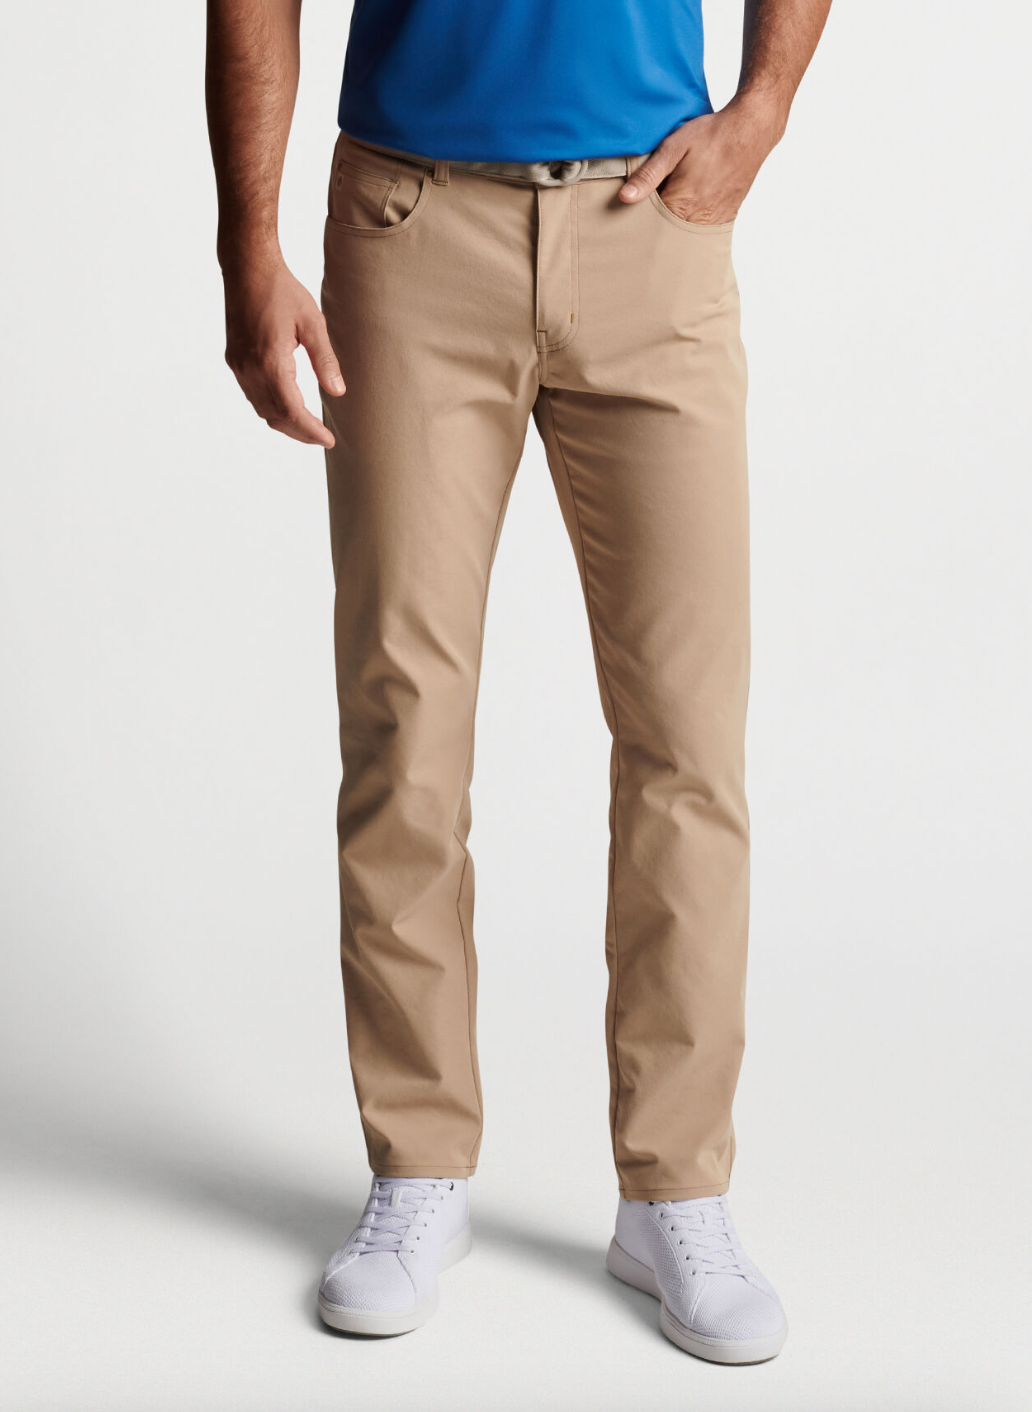 EB66 Performance 5-Pocket Pant Warm Beige – Beau Outfitters